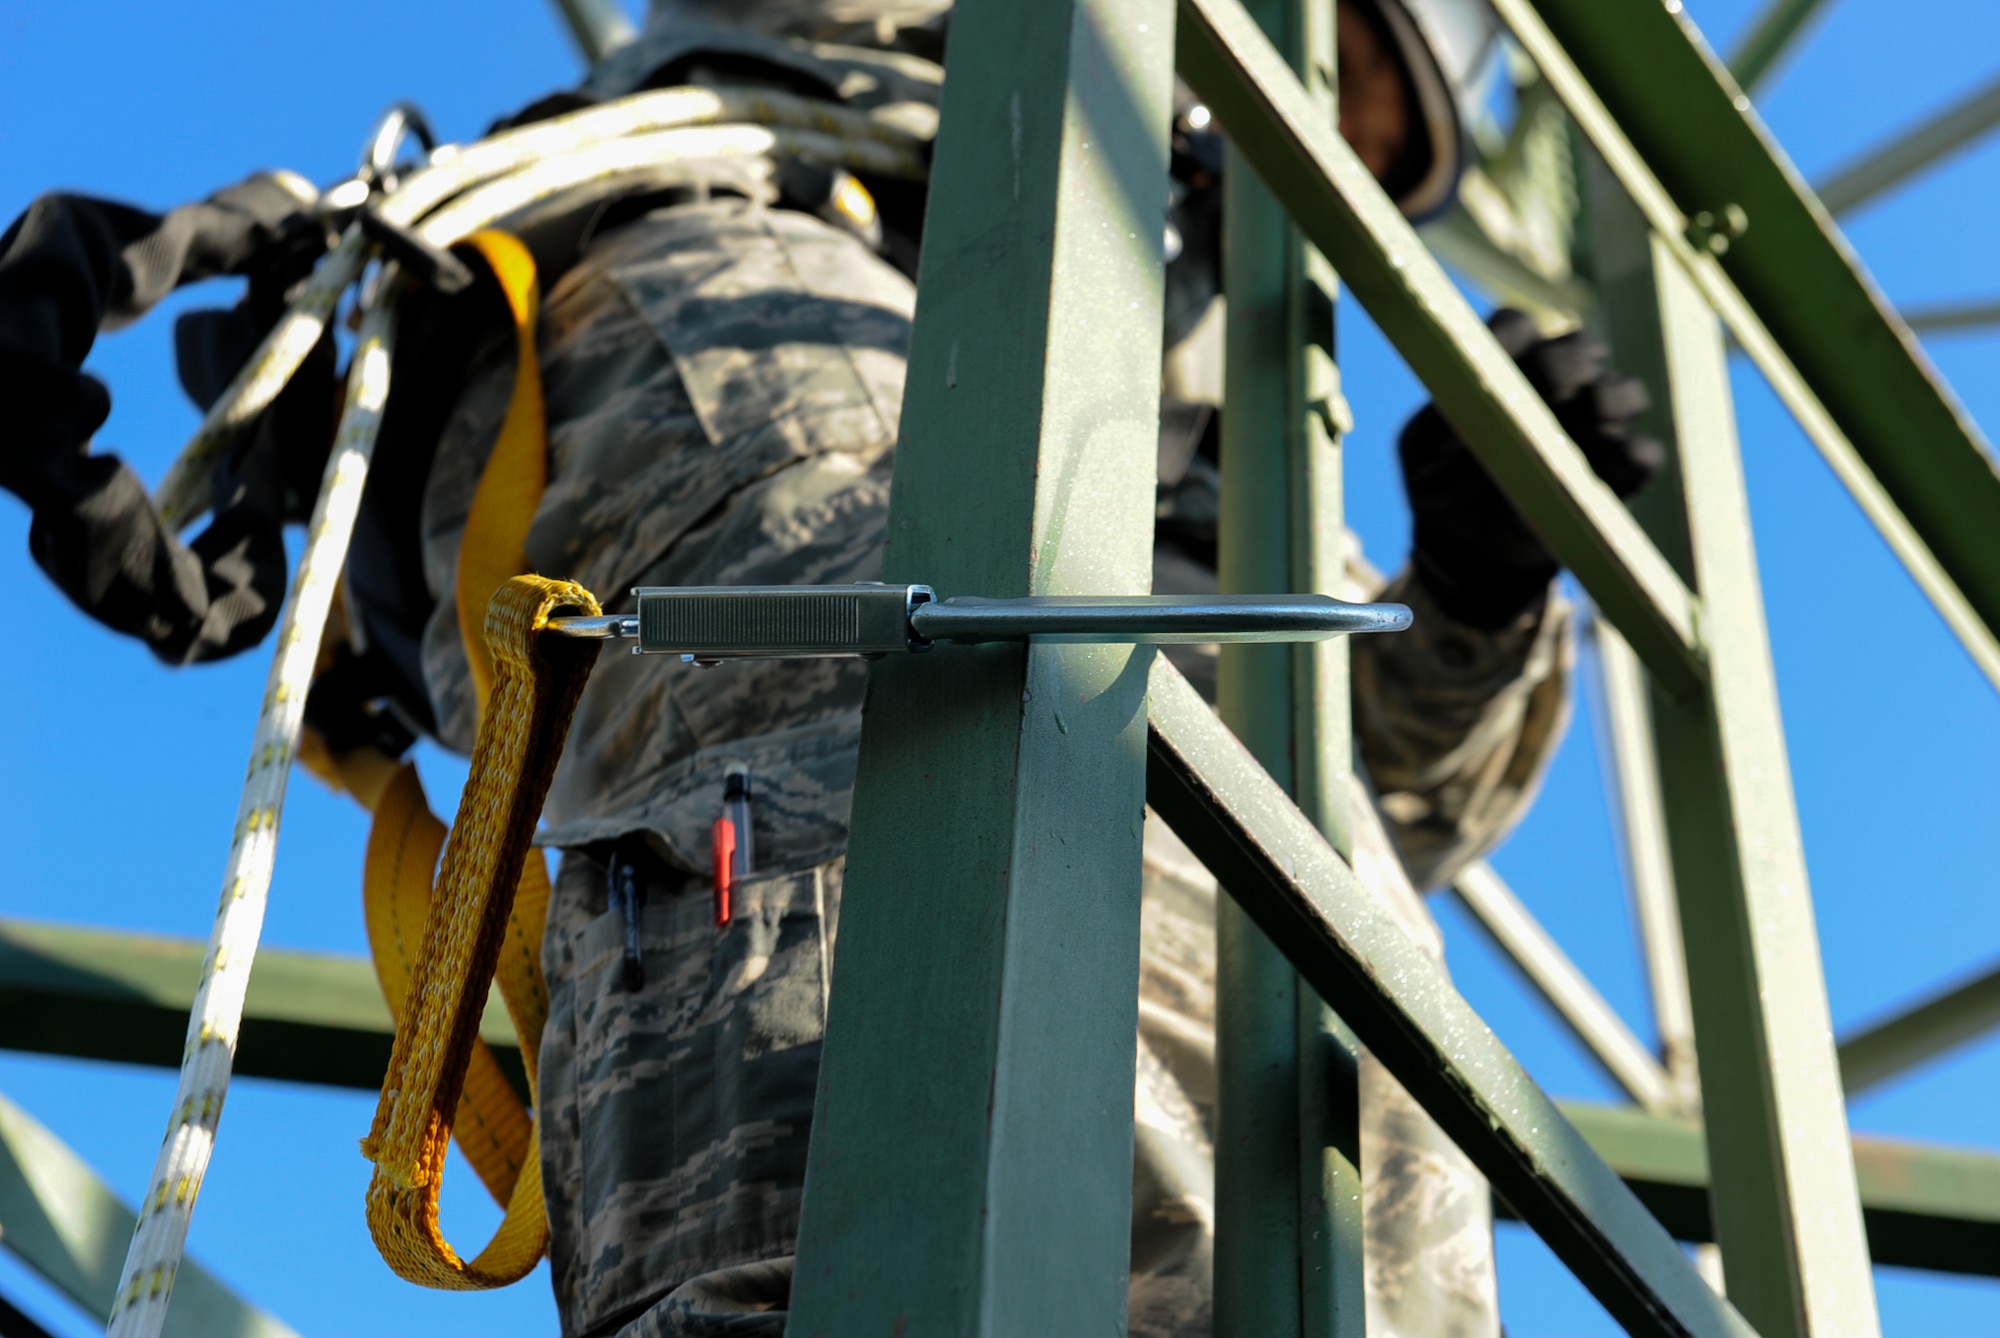 Senior Airman Nikki Erling, 86th Operations Support Squadron airfield systems technician, climbs down from an air traffic control radio antenna at Ramstein Air Base, Germany, Nov. 14, 2016. Airmen who climb the antennas go through a climbing certification course that includes a basic fear of heights test. (U.S. Air Force photo by Airman 1st Class Savannah L. Waters)